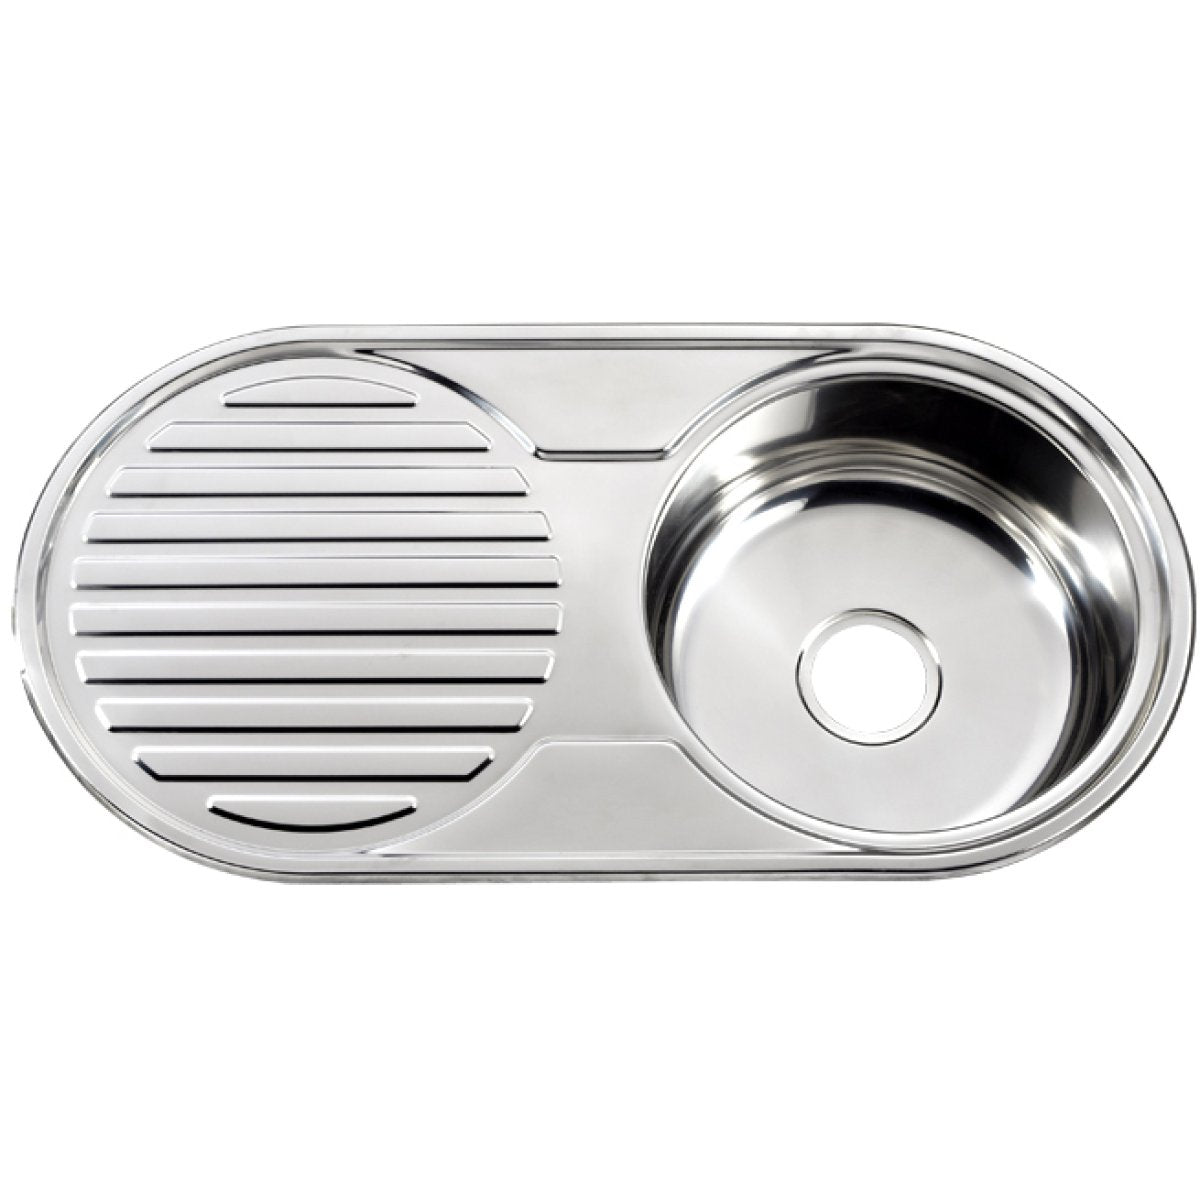 Collette Single Bowl Stainless Steel Kitchen Sink